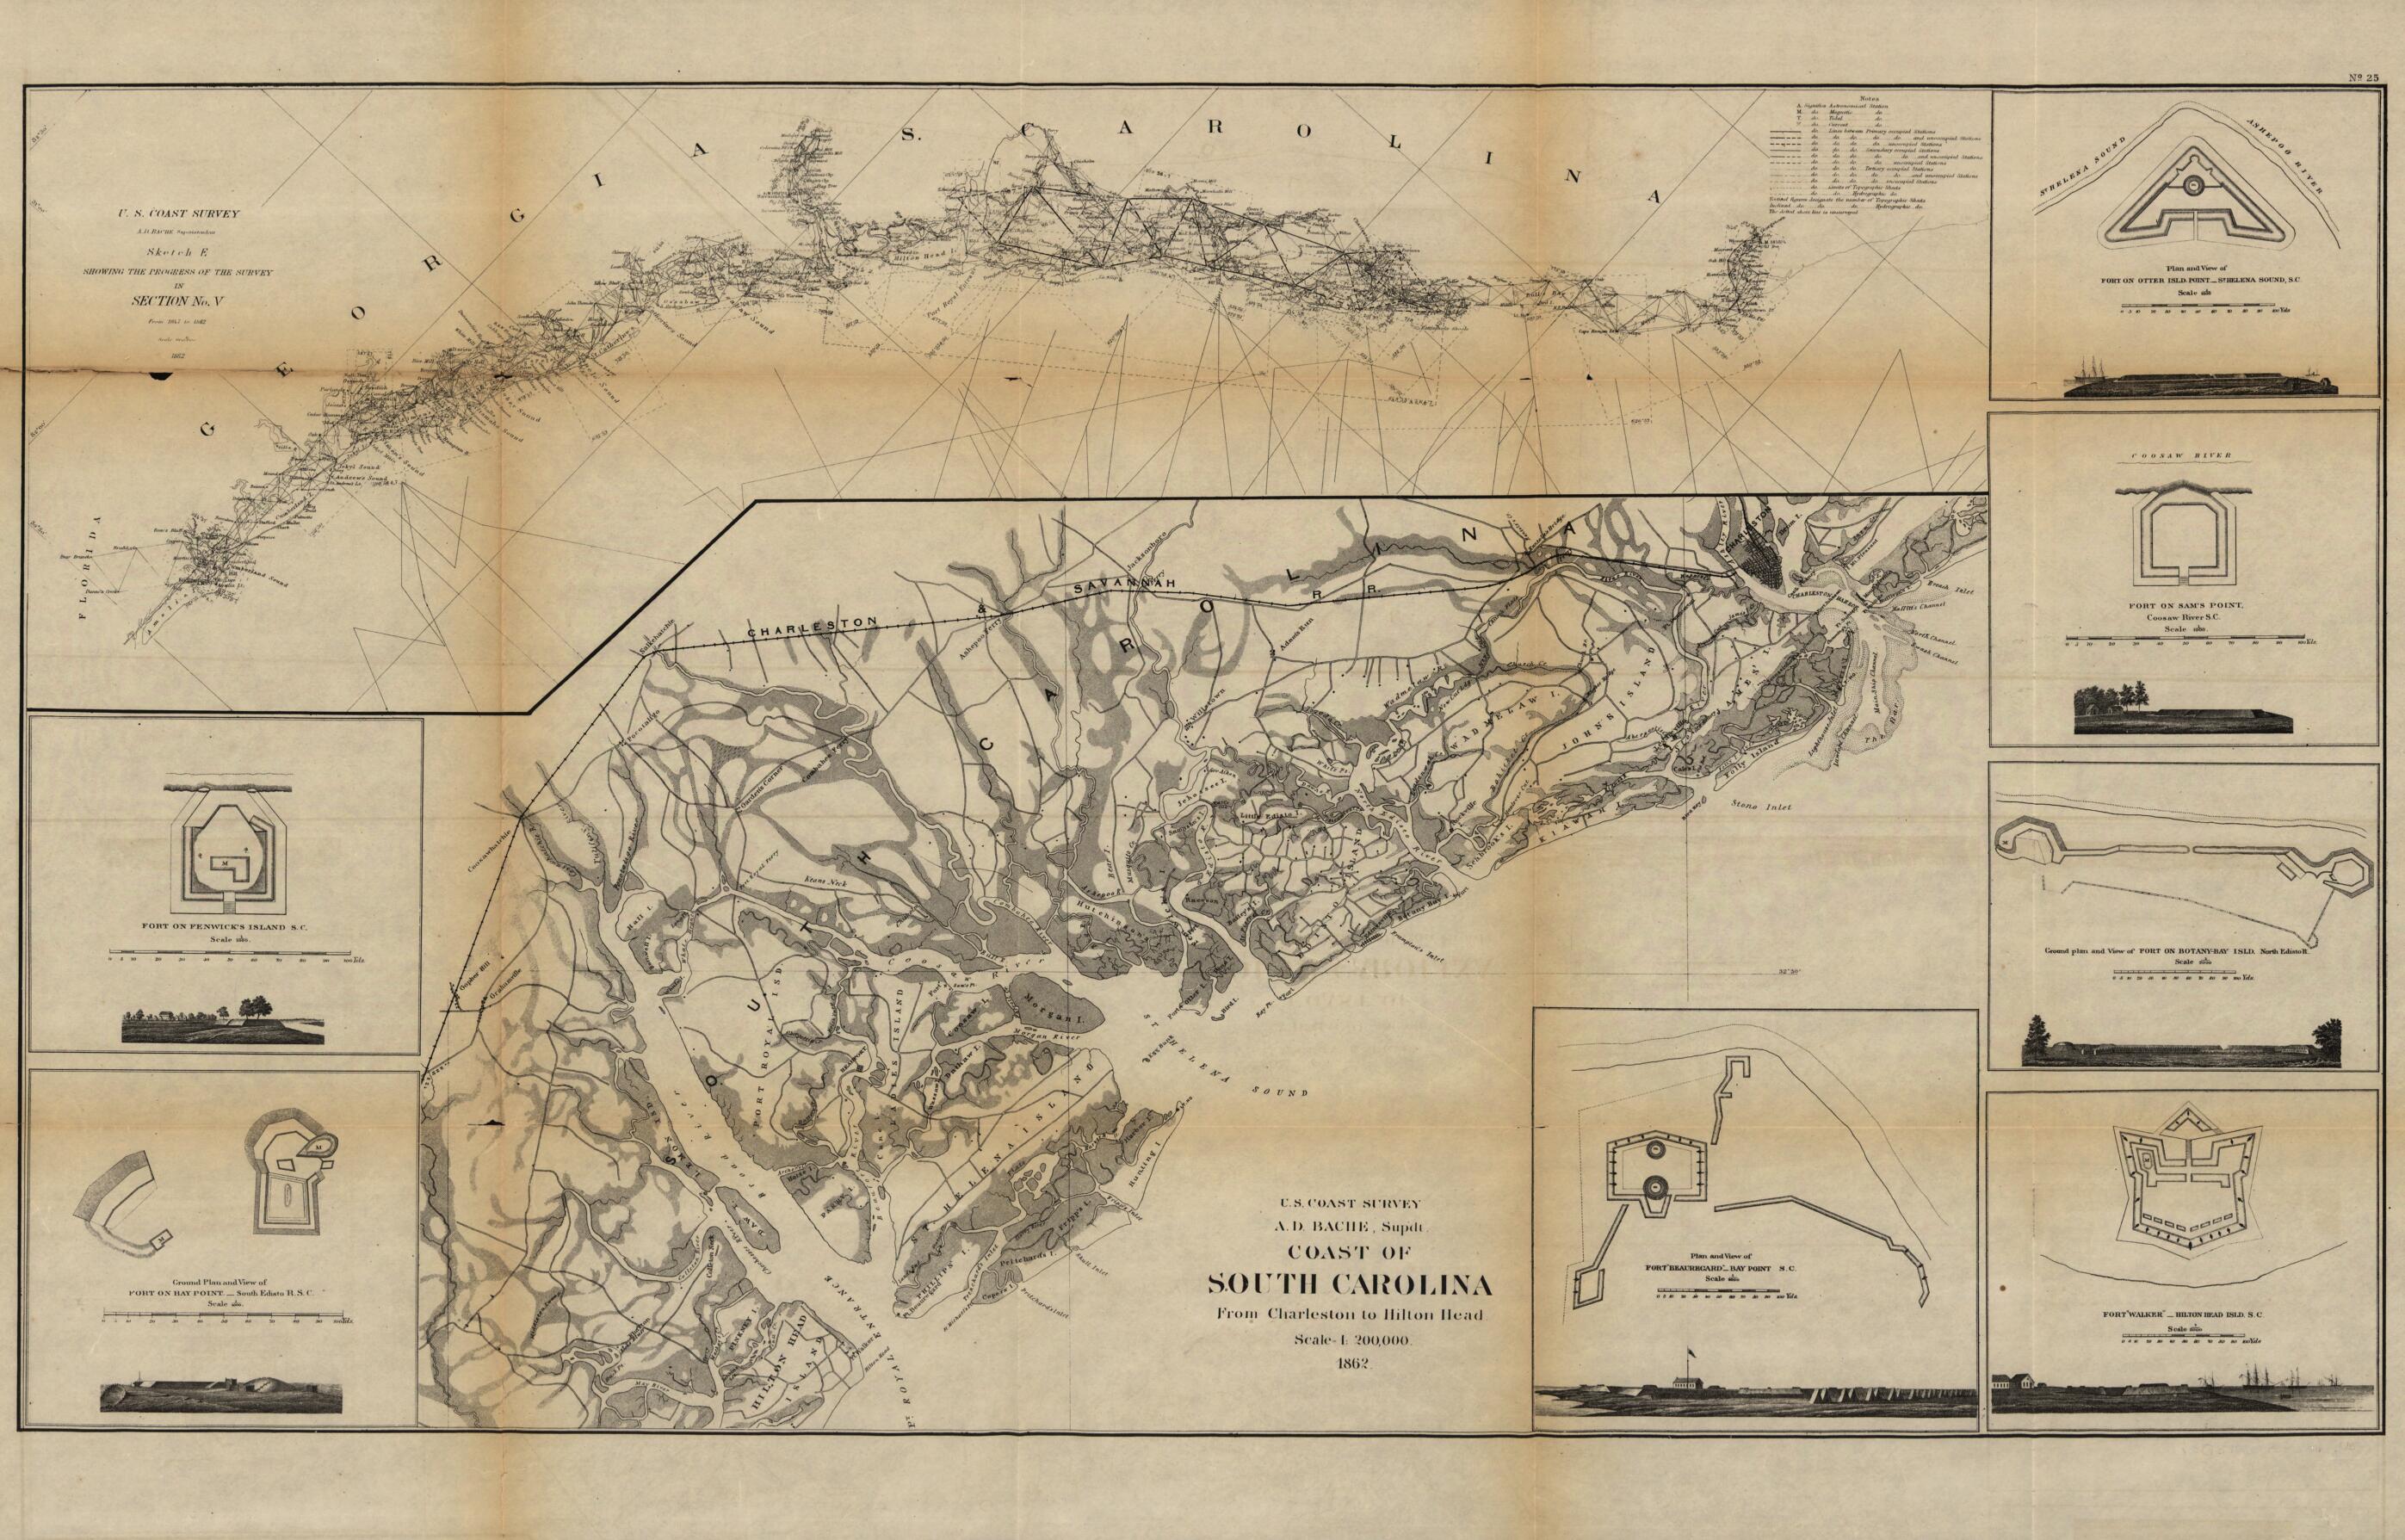 This old map of Coast of South Carolina from Charleston to Hilton Head from 1862 was created by  United States Coast Survey in 1862